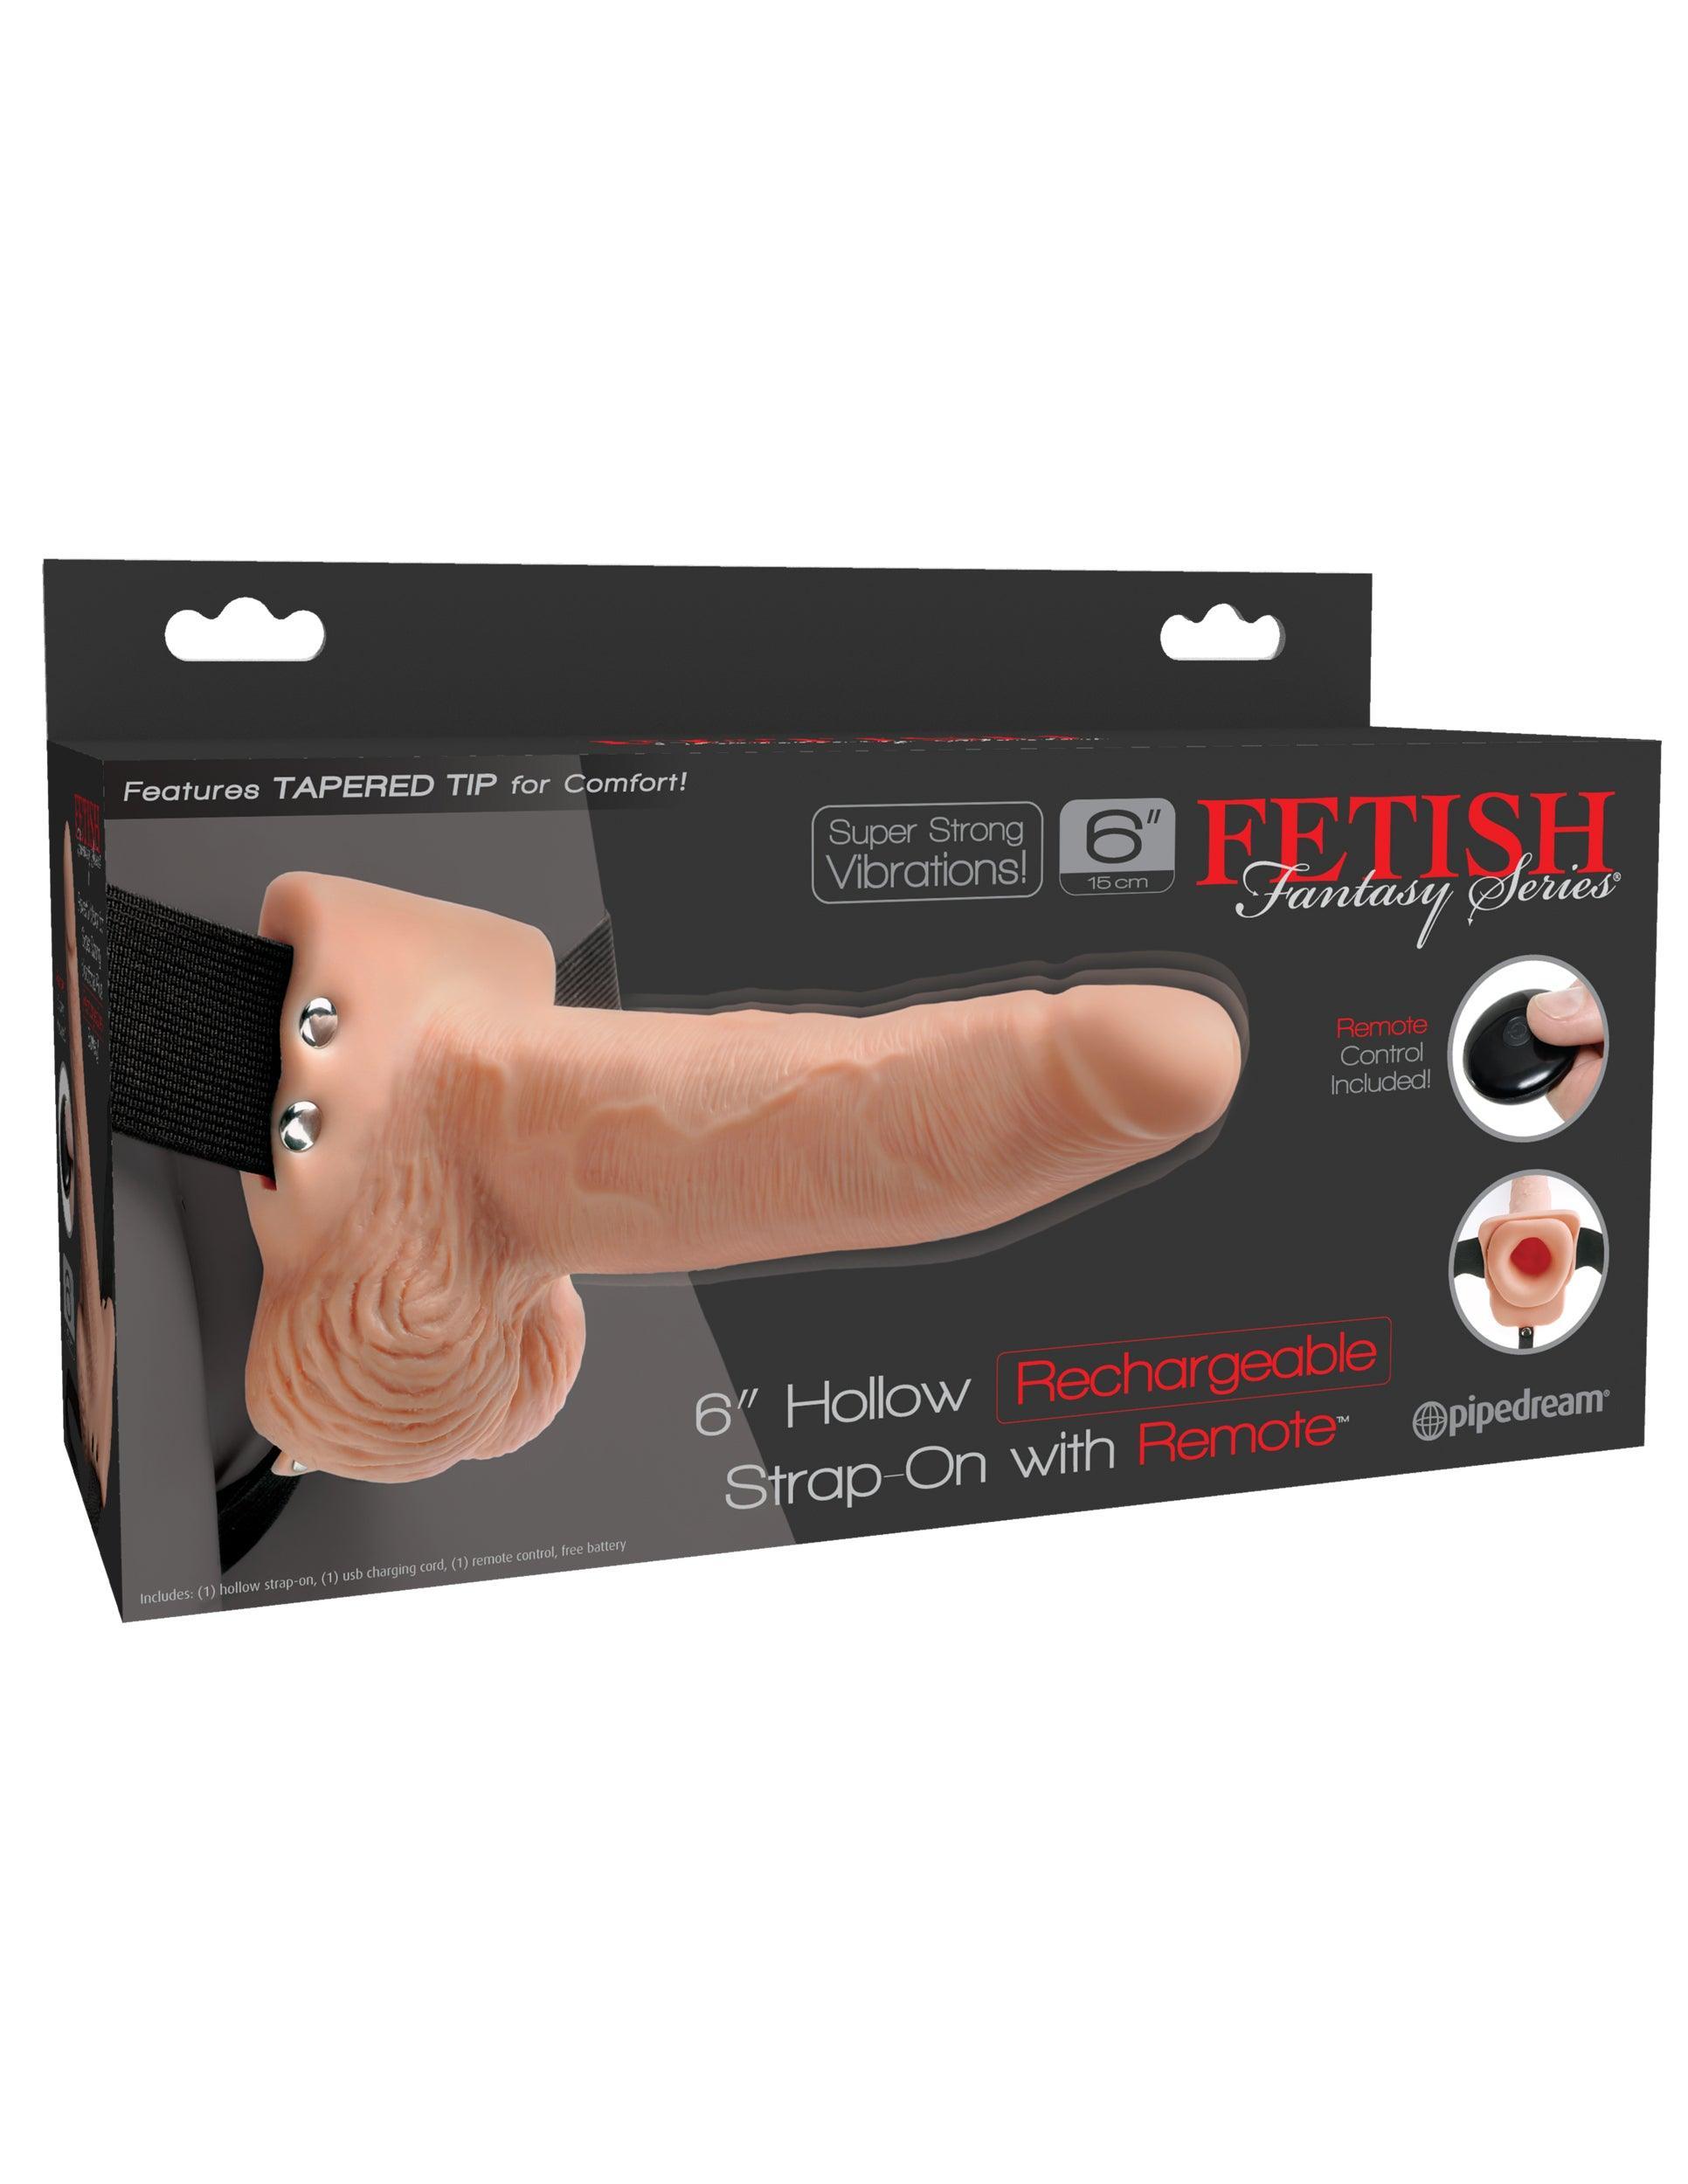 Fetish Fantasy Series 6 Inch Hollow Rechargeable Strap-on With Remote - Flesh - My Sex Toy Hub